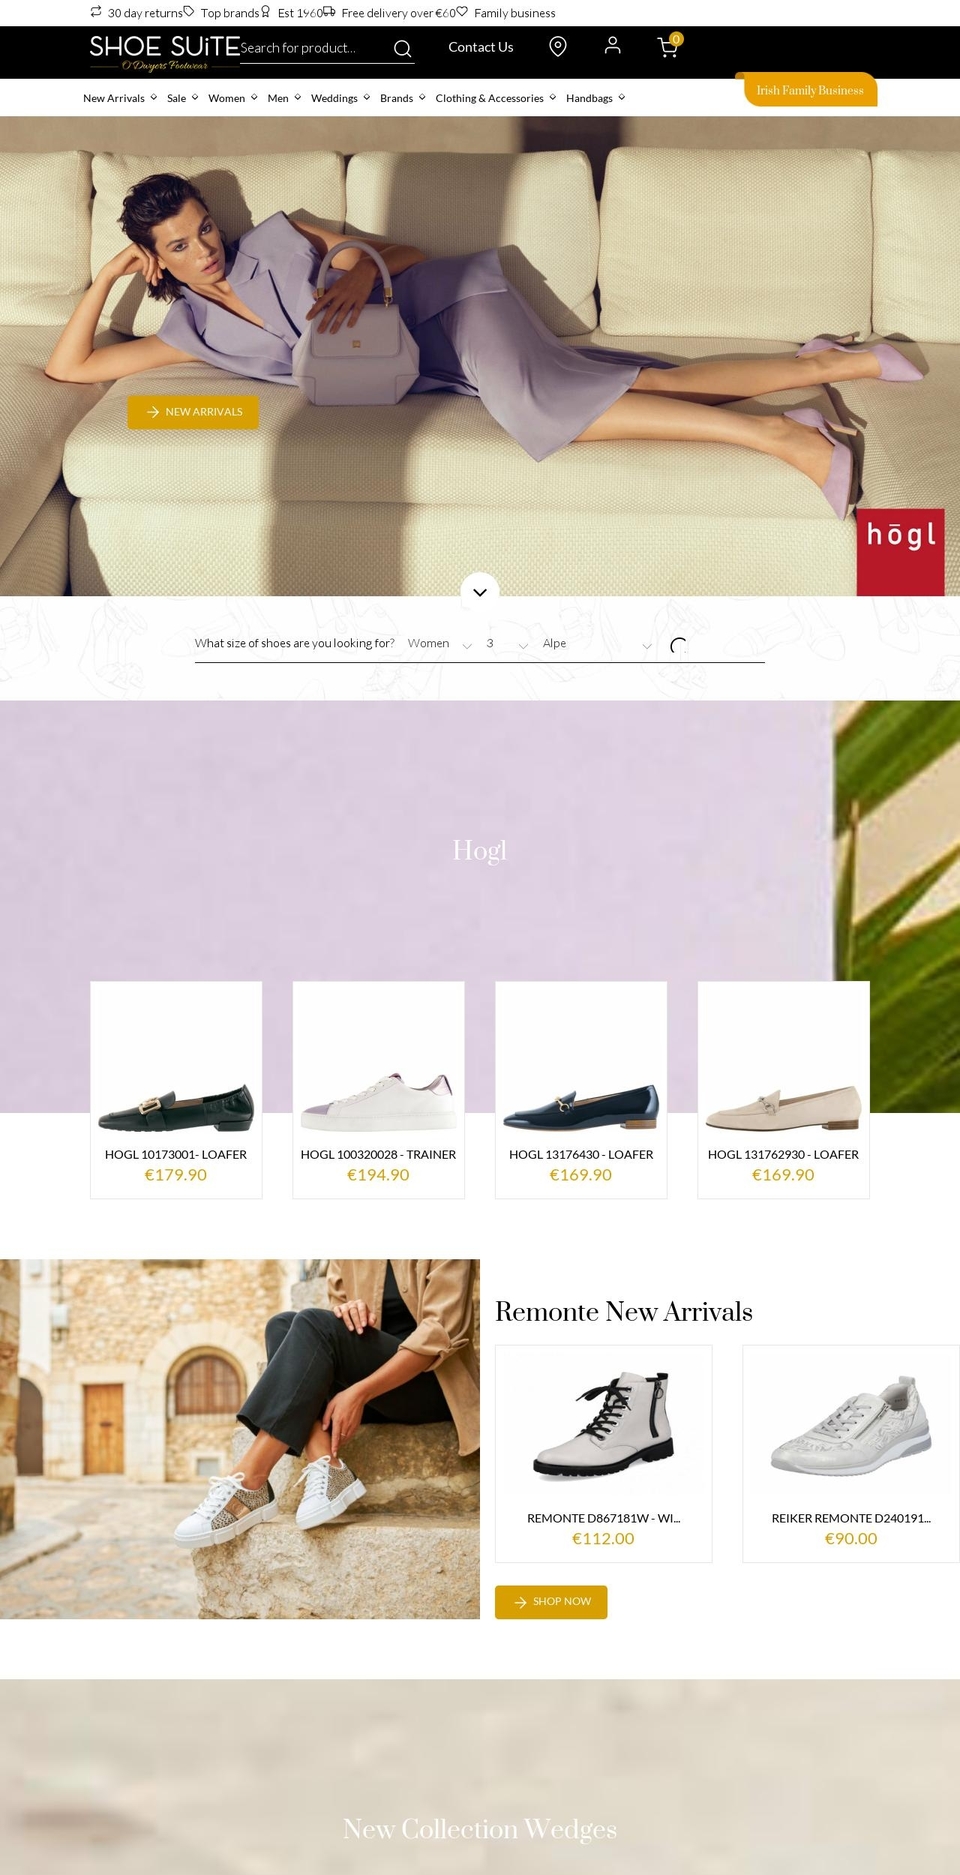 Timber Shopify theme site example shoesuite.ie